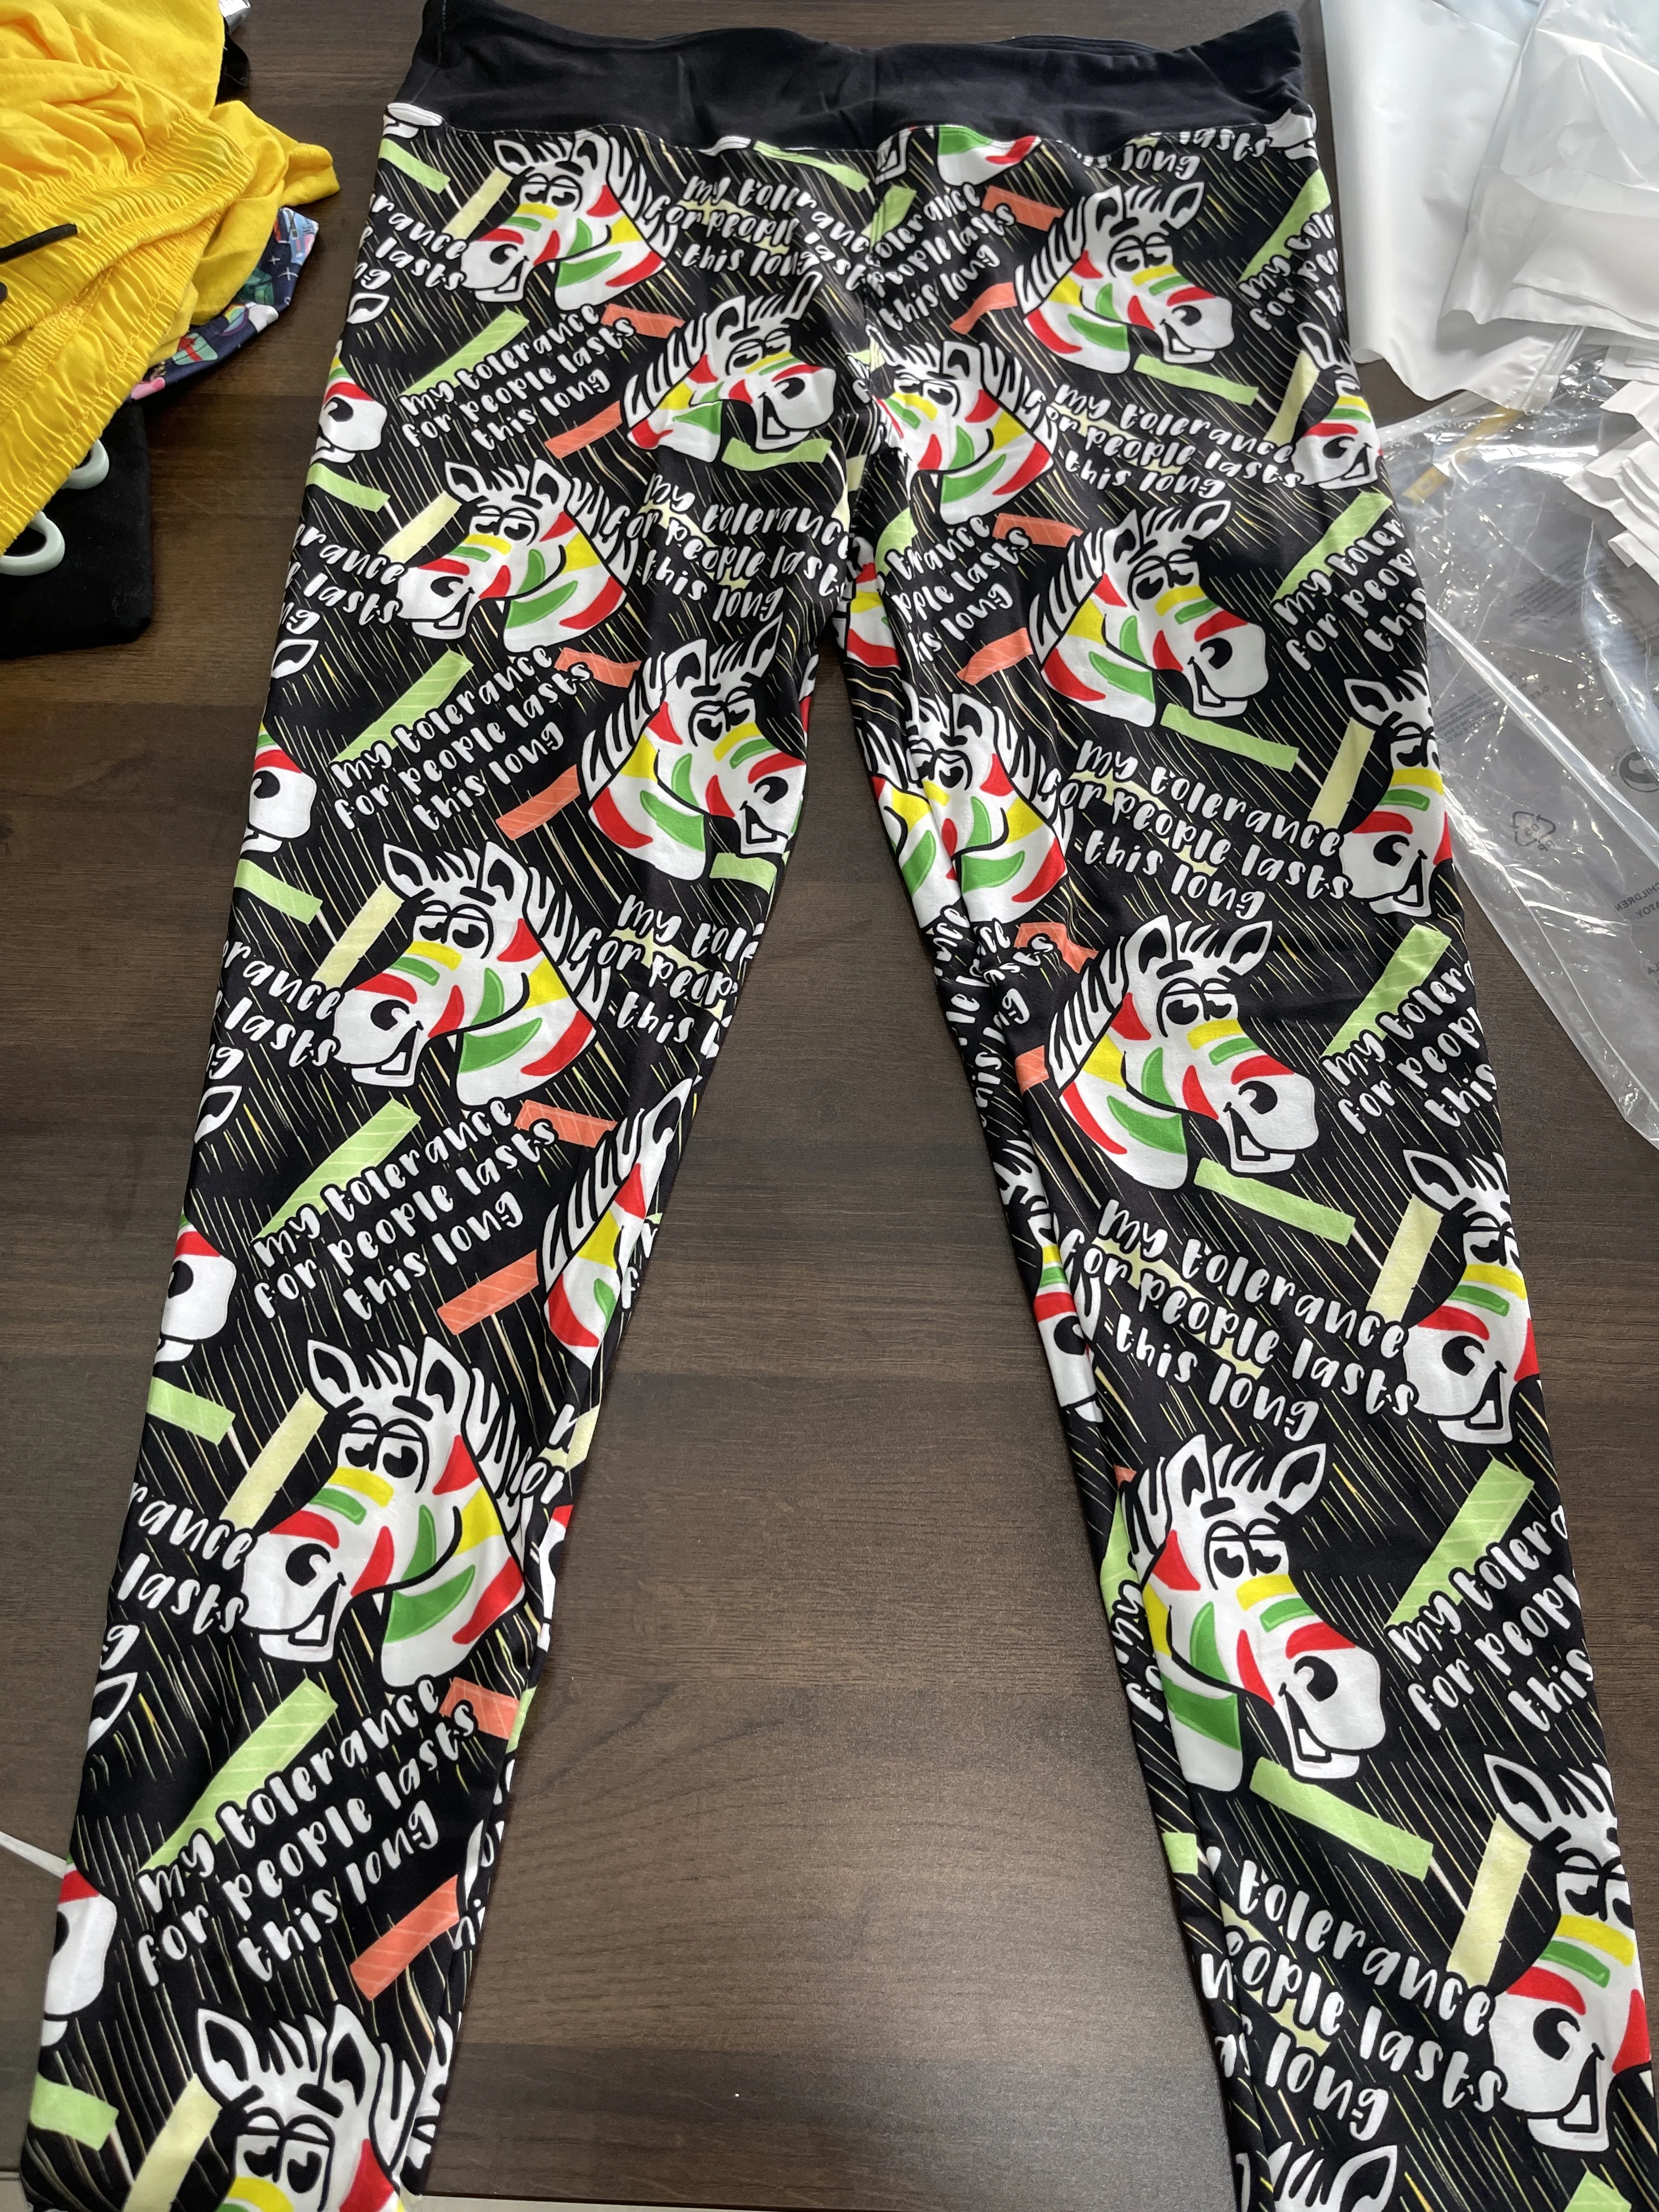 Random delivery of color and size custom 92% polyester 8% spandex yoga waist soft double brush leggings surplus stock clearance